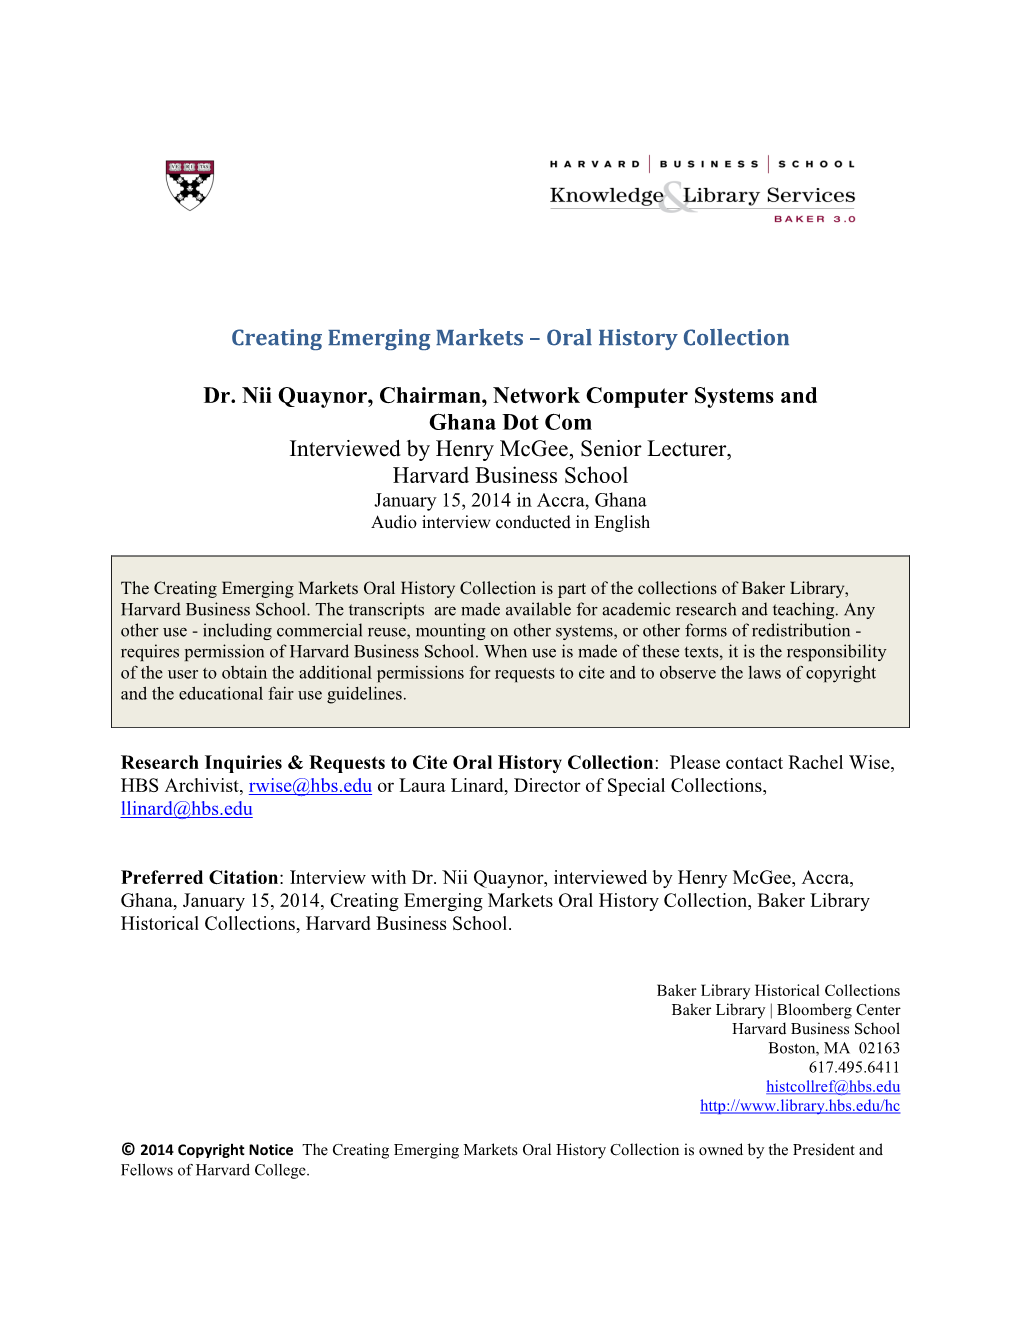 Creating Emerging Markets – Oral History Collection Dr. Nii Quaynor